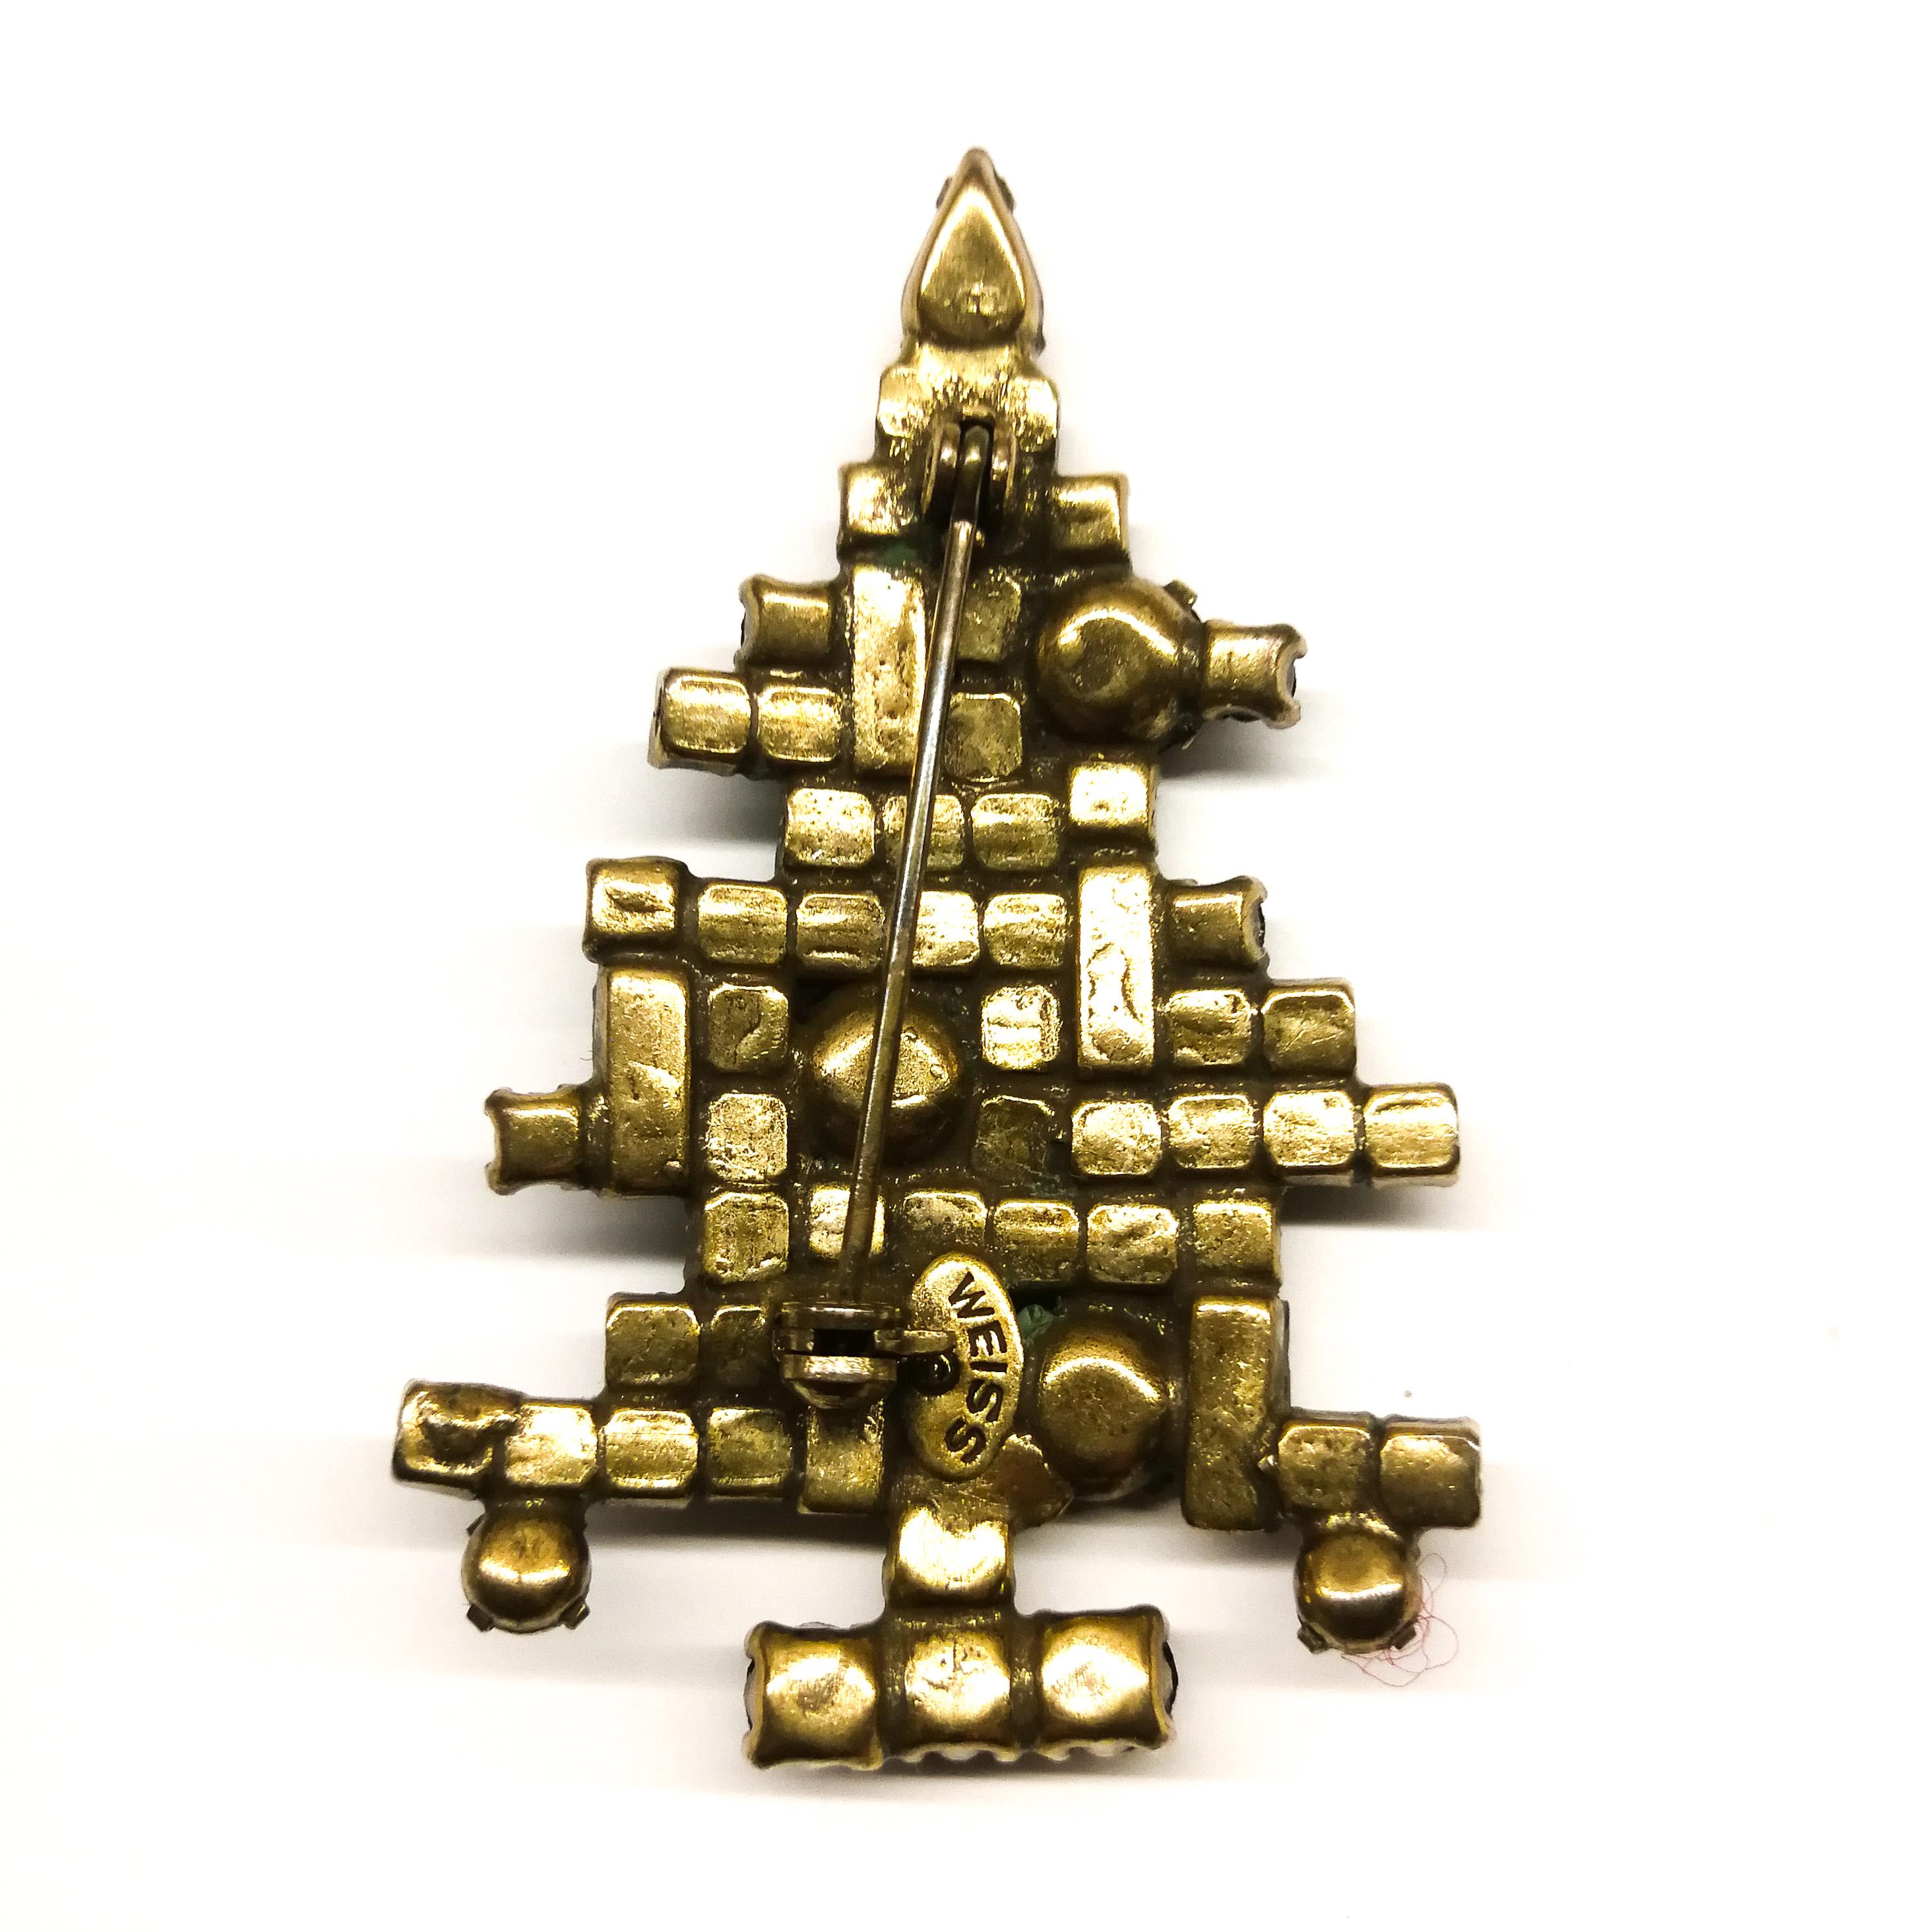 A stylised and imaginative take on a Christmas Tree, this brooch is an iconic design, made by Weiss, and well known in vintage costume jewellery, for its unusual geometric, Art Deco style, although made in the 1950s. This design is the 'middle'